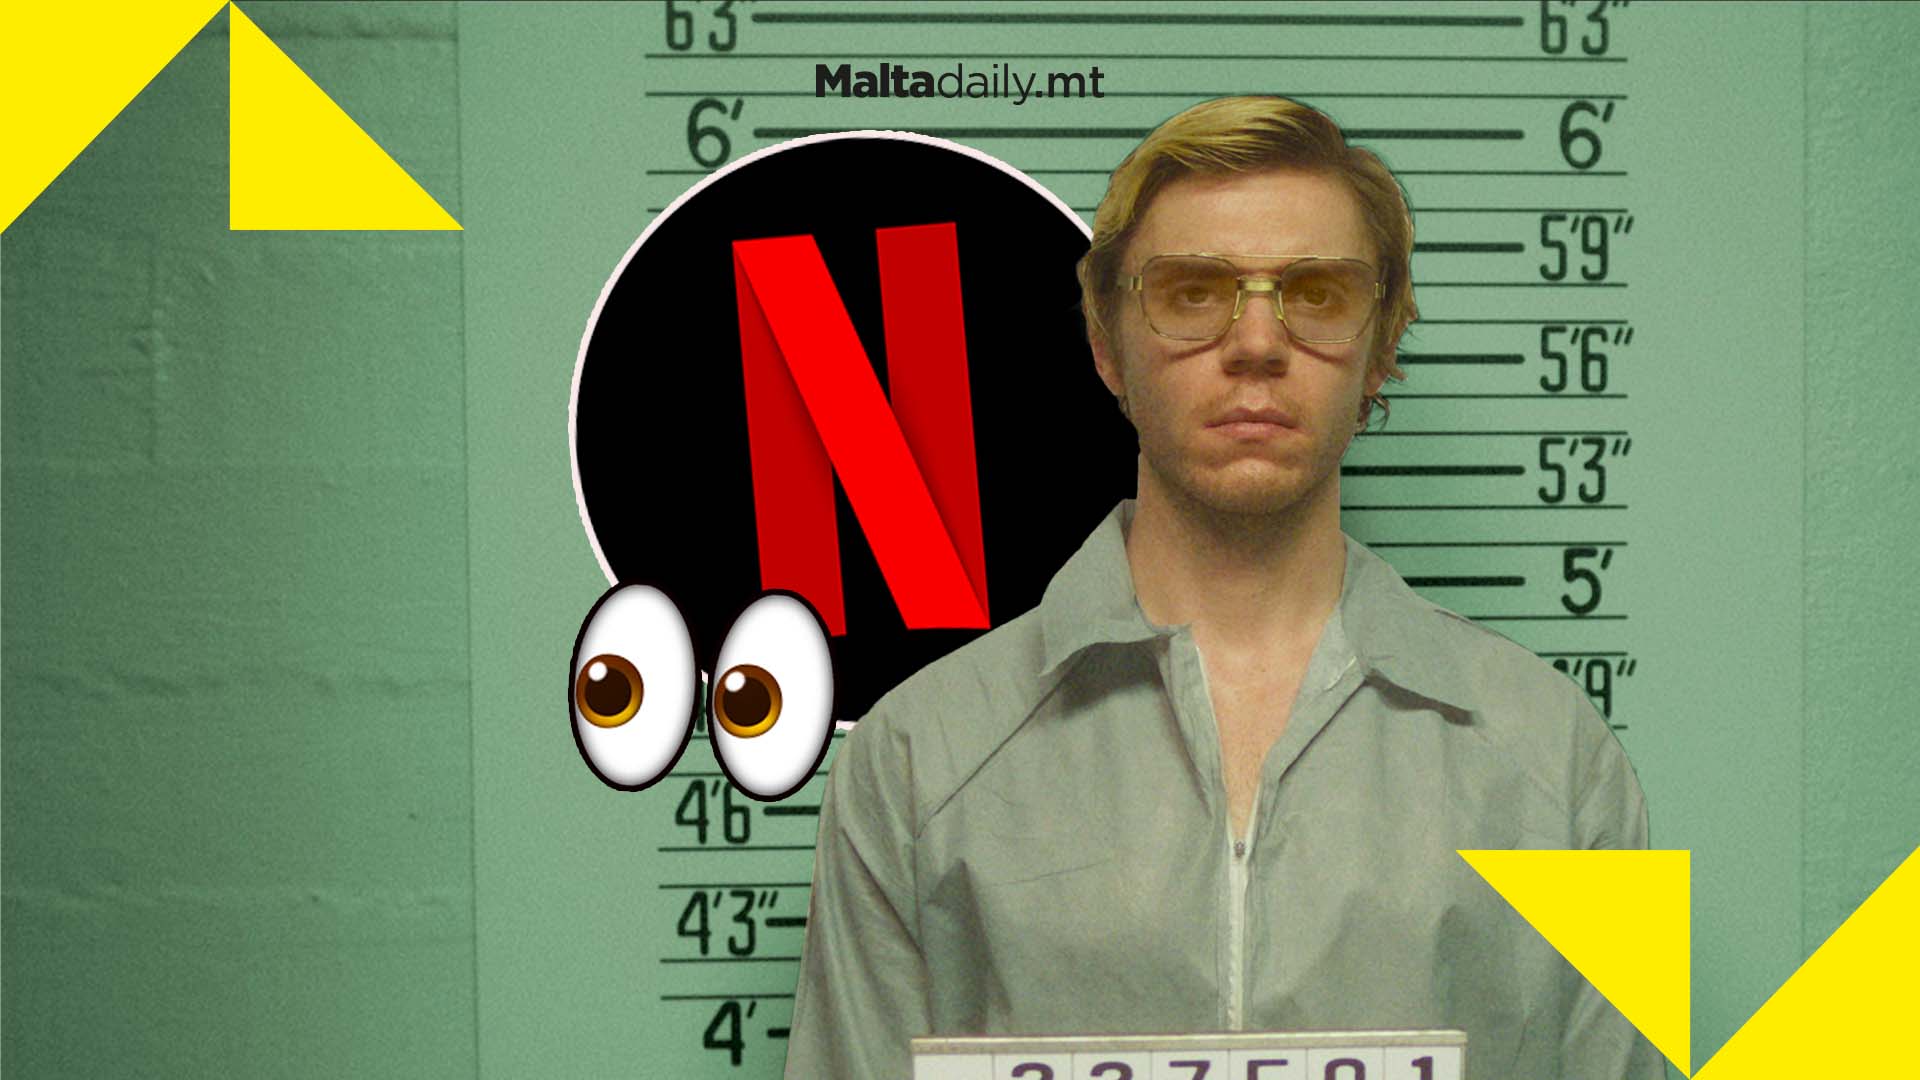 Dahmer becomes one of Netflix’s most successful shows of all time